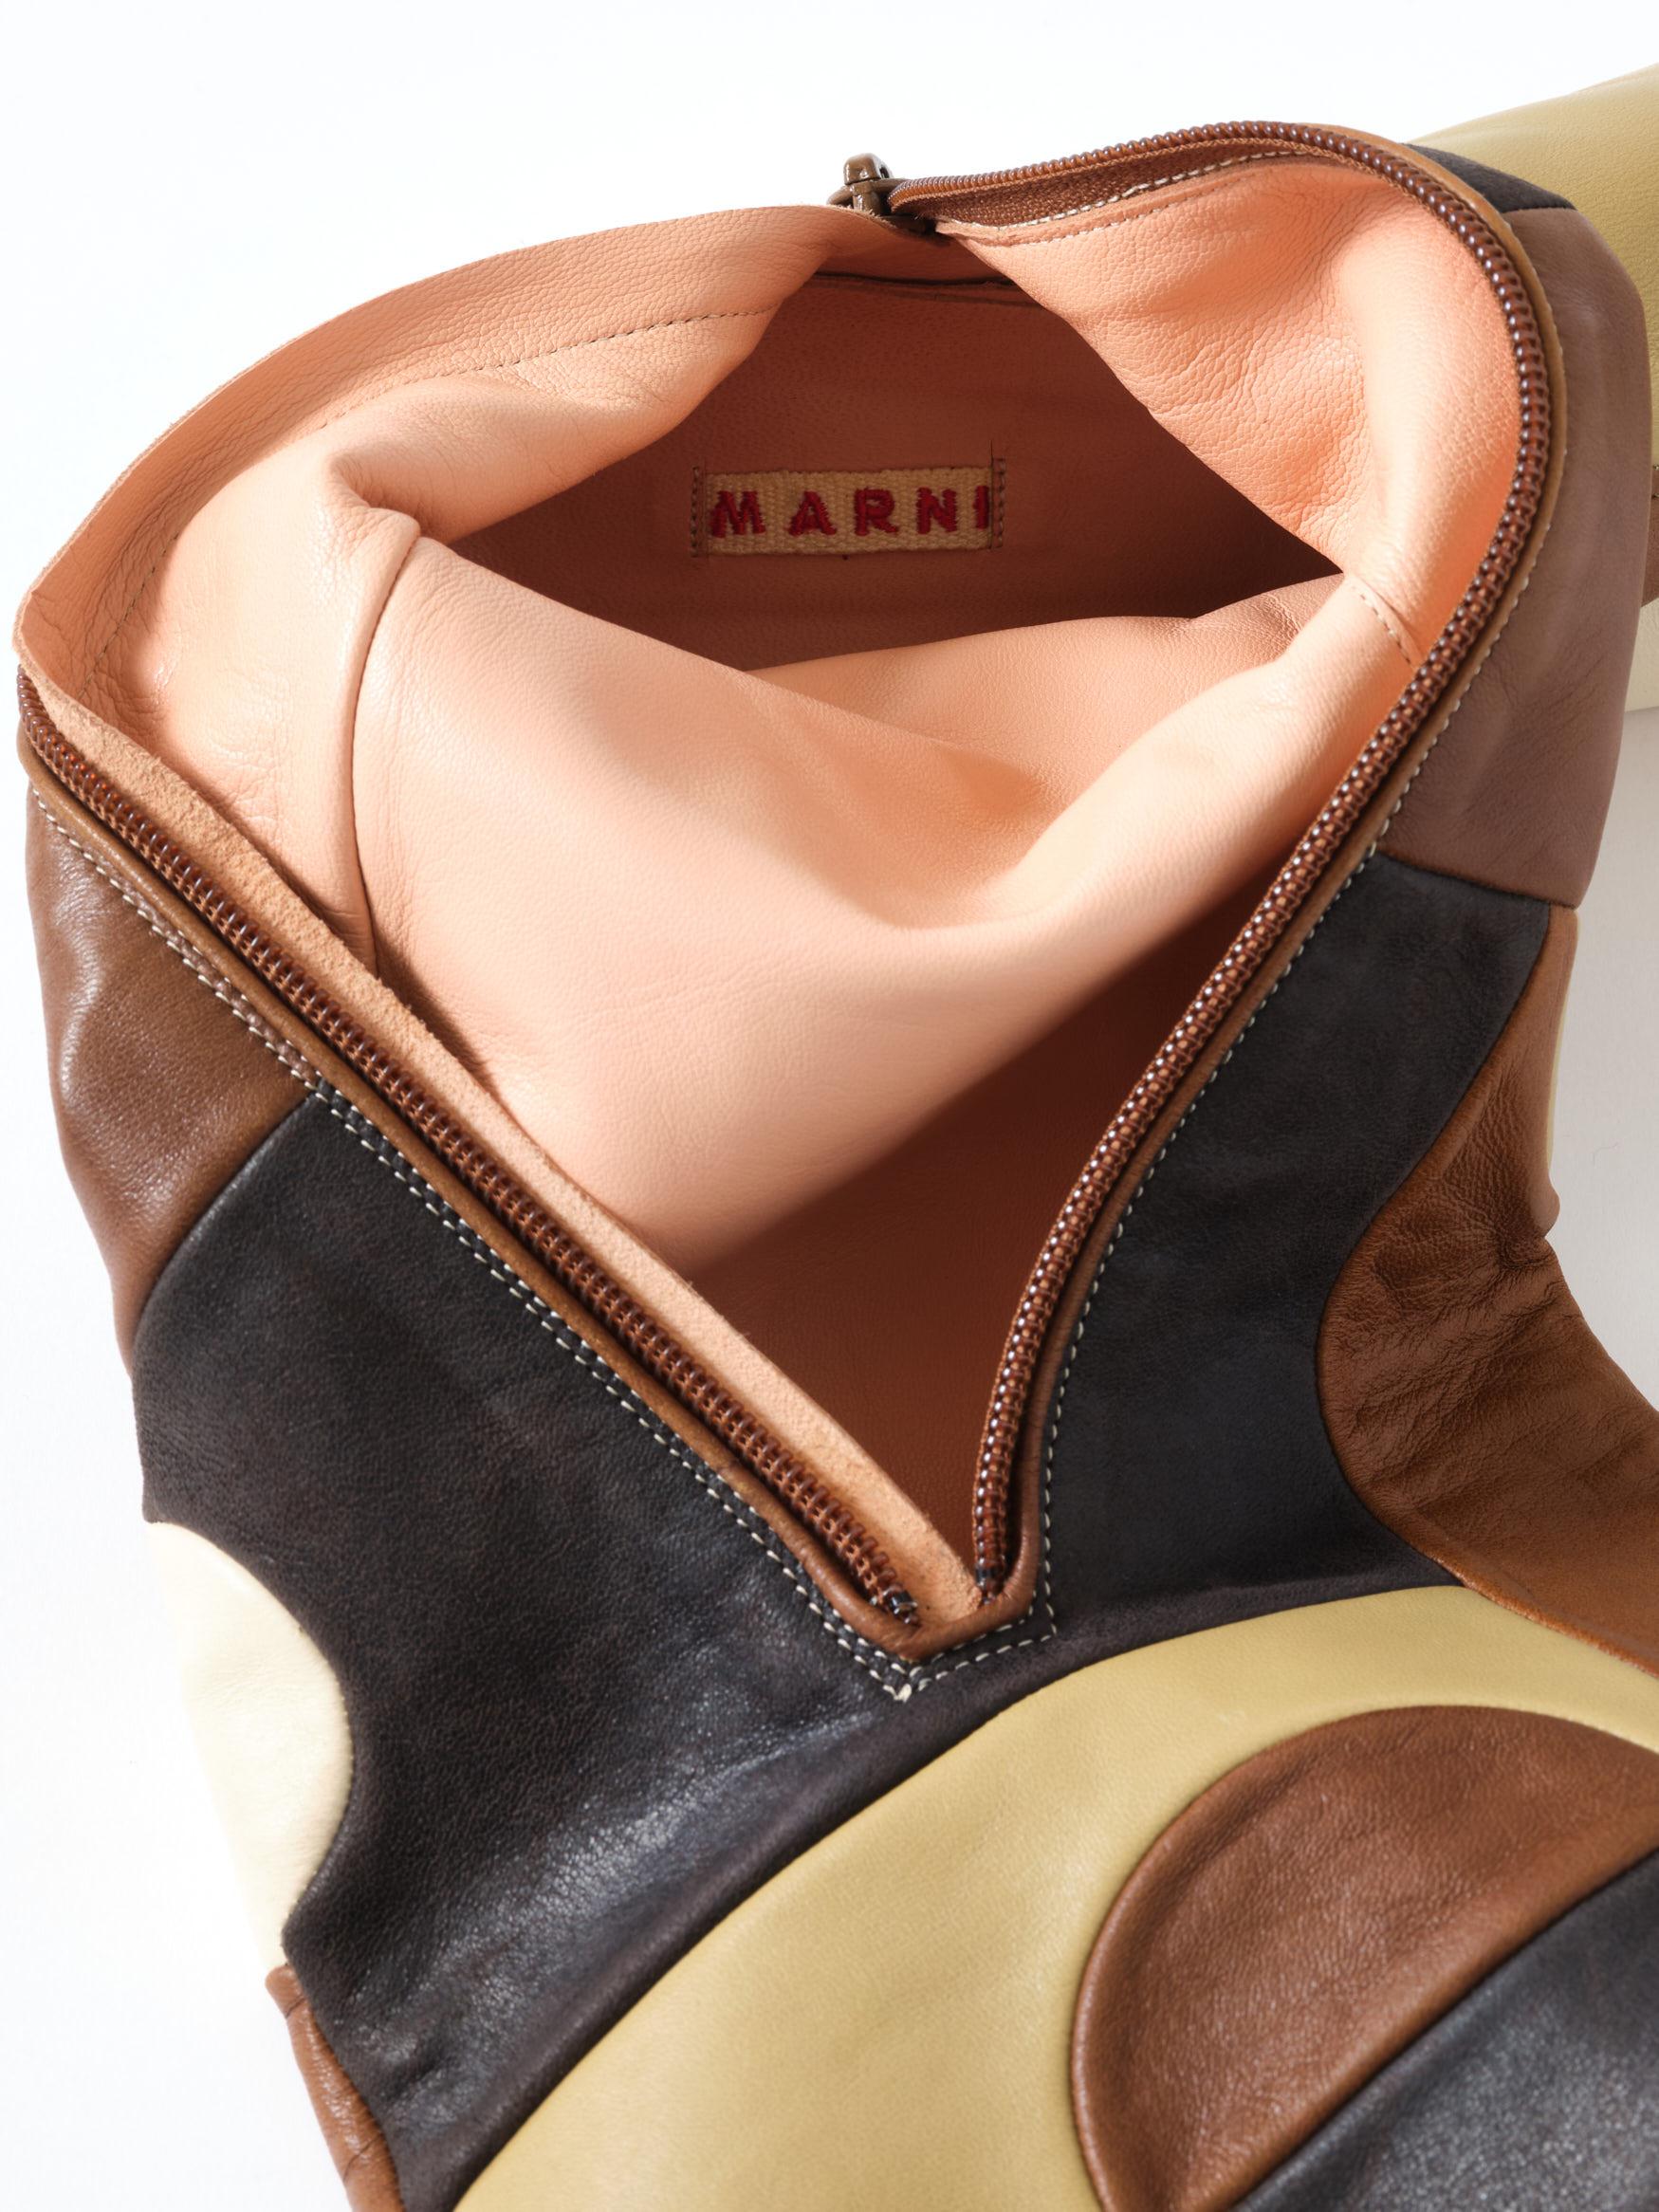 Marni Leather Boots, 1960's Style Design, Brown, Beige & Khaki, Pair of Boots For Sale 5